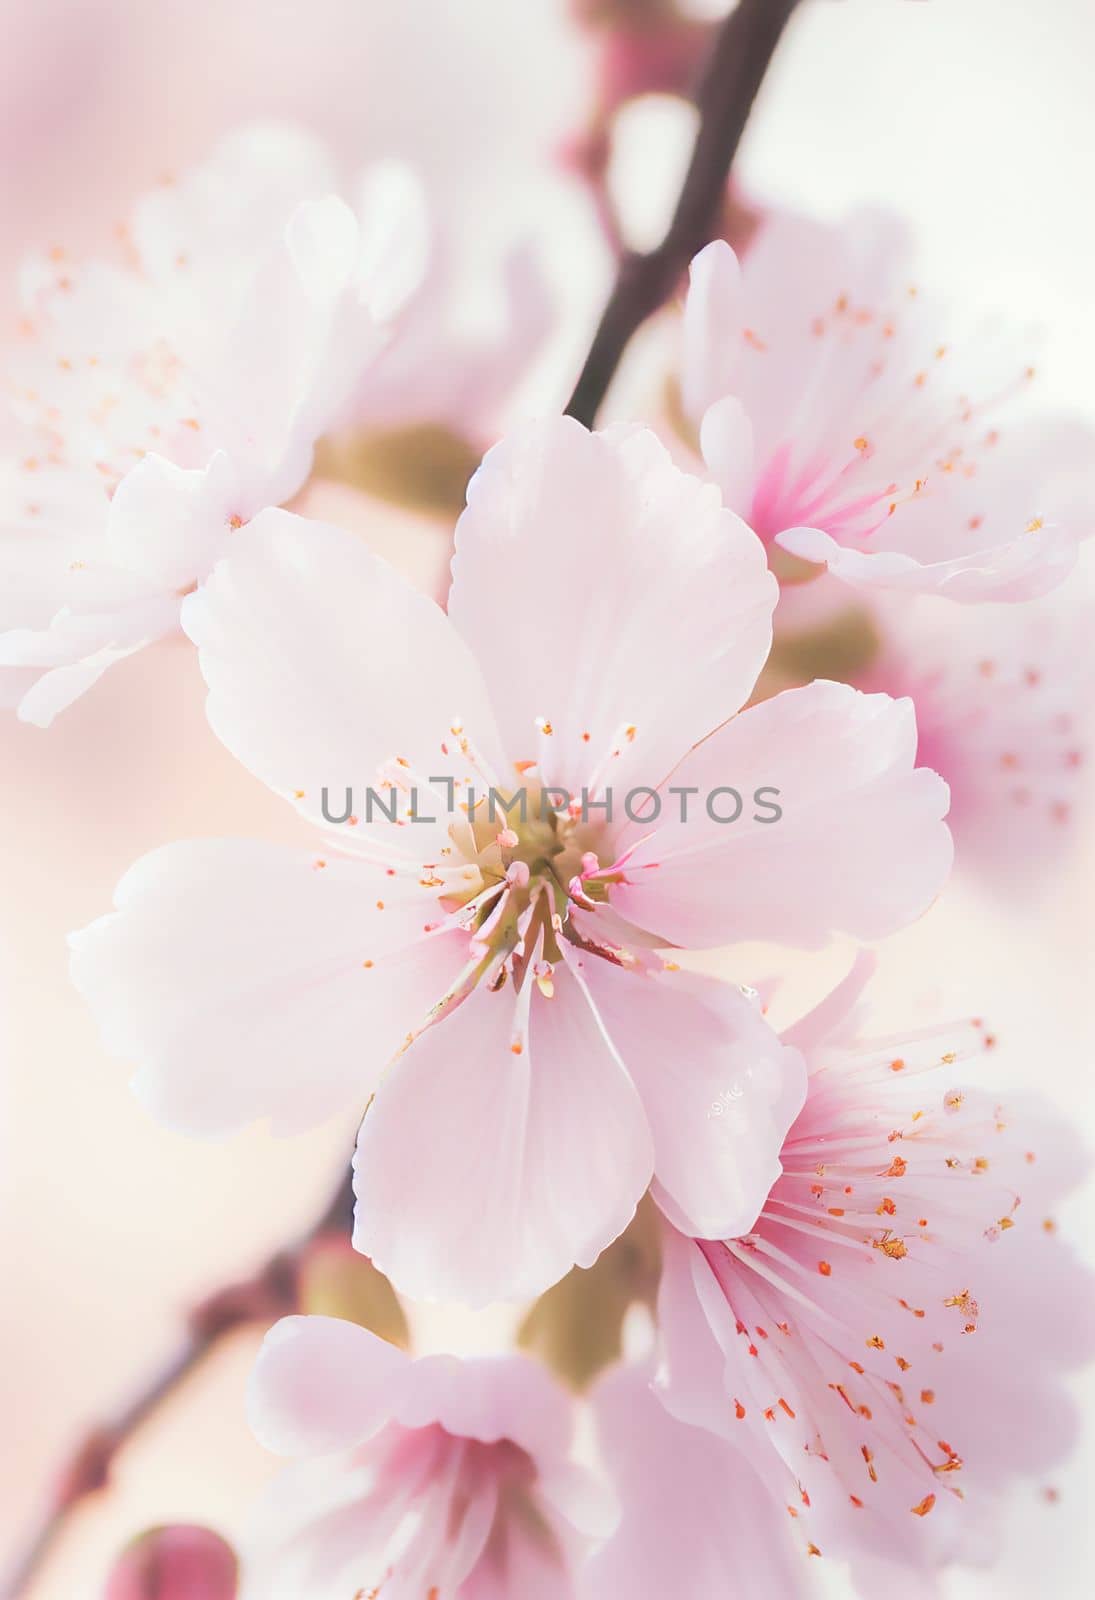 Spring cherry blossom against pastel pink and white background. Shallow depth of field dreamy effect by FokasuArt